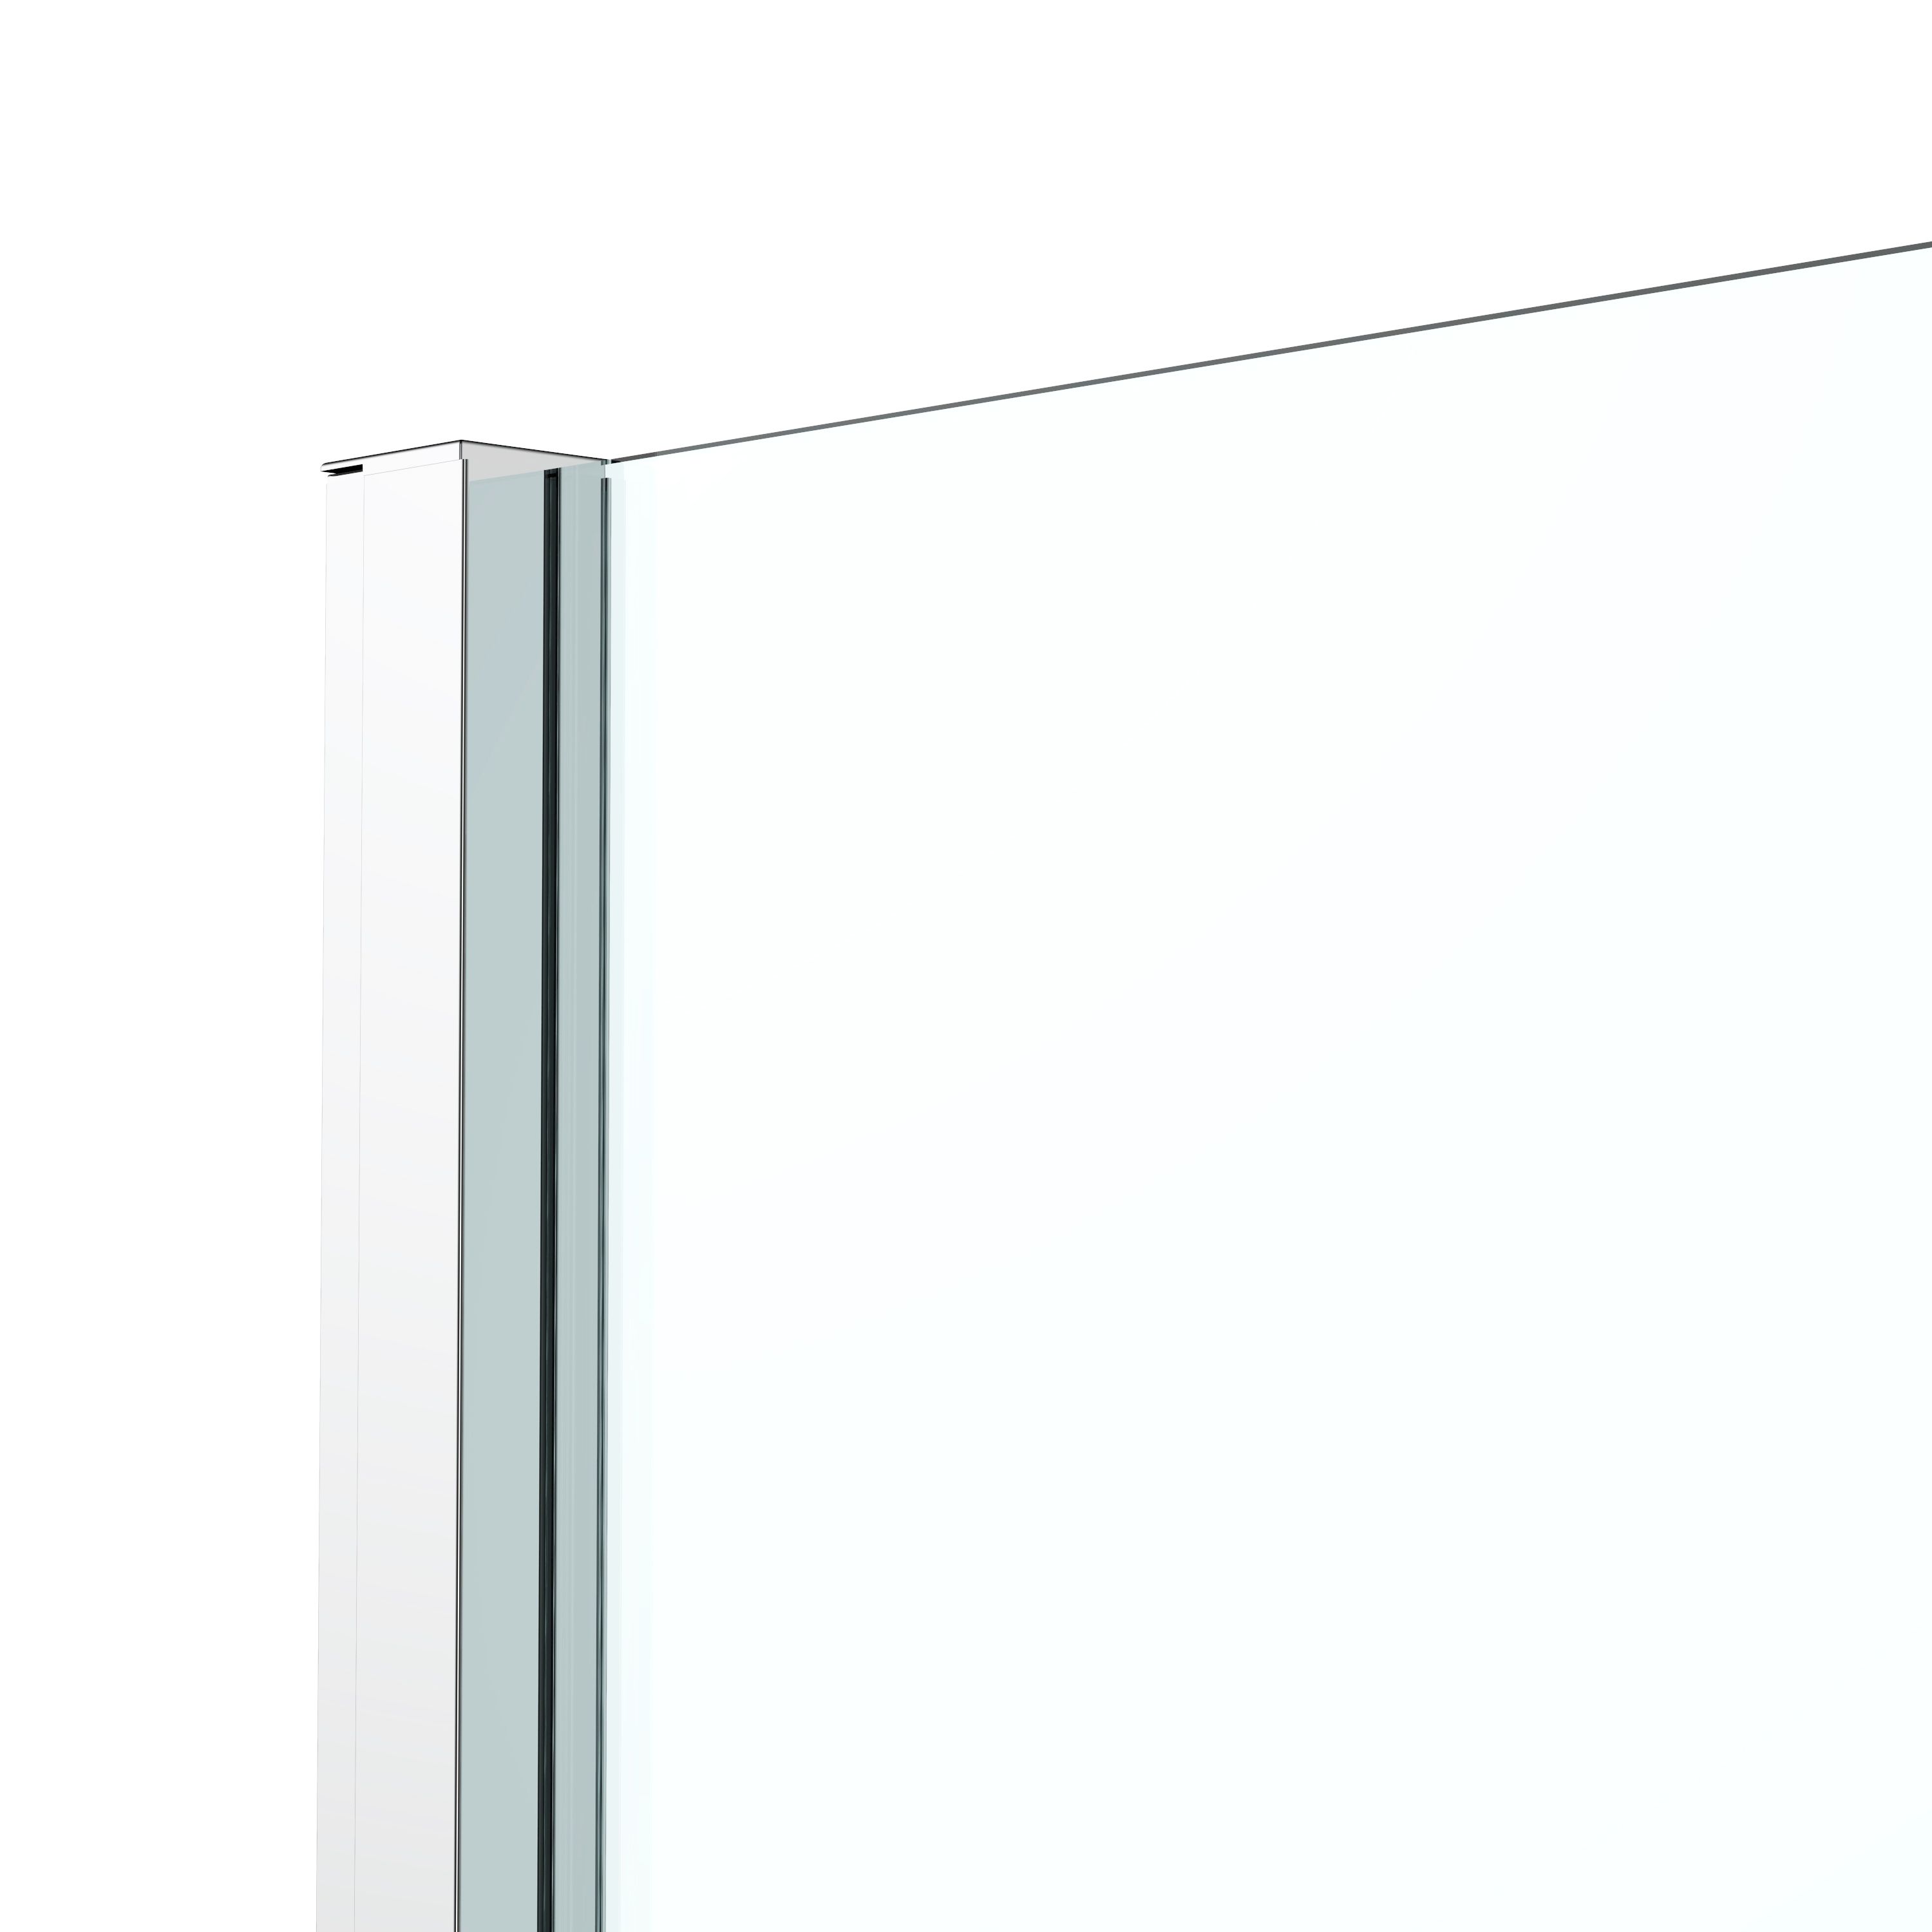 GoodHome Ledava Framed Clear Fixed Side End panel (H)195cm (W)80cm